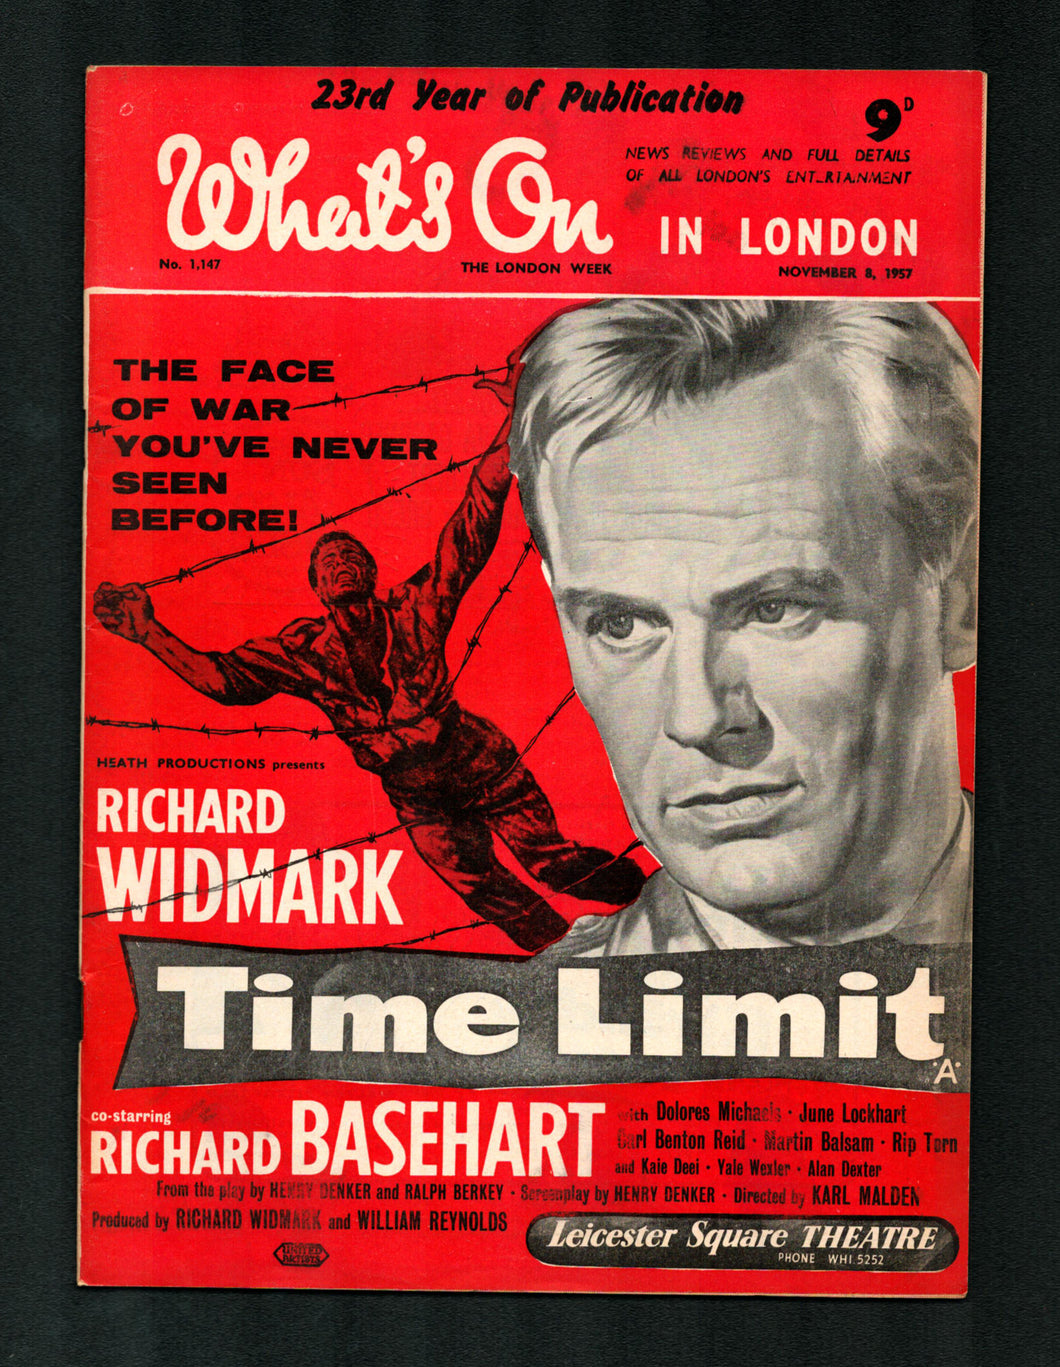 Whats on in London No 1147 Nov 8 1957